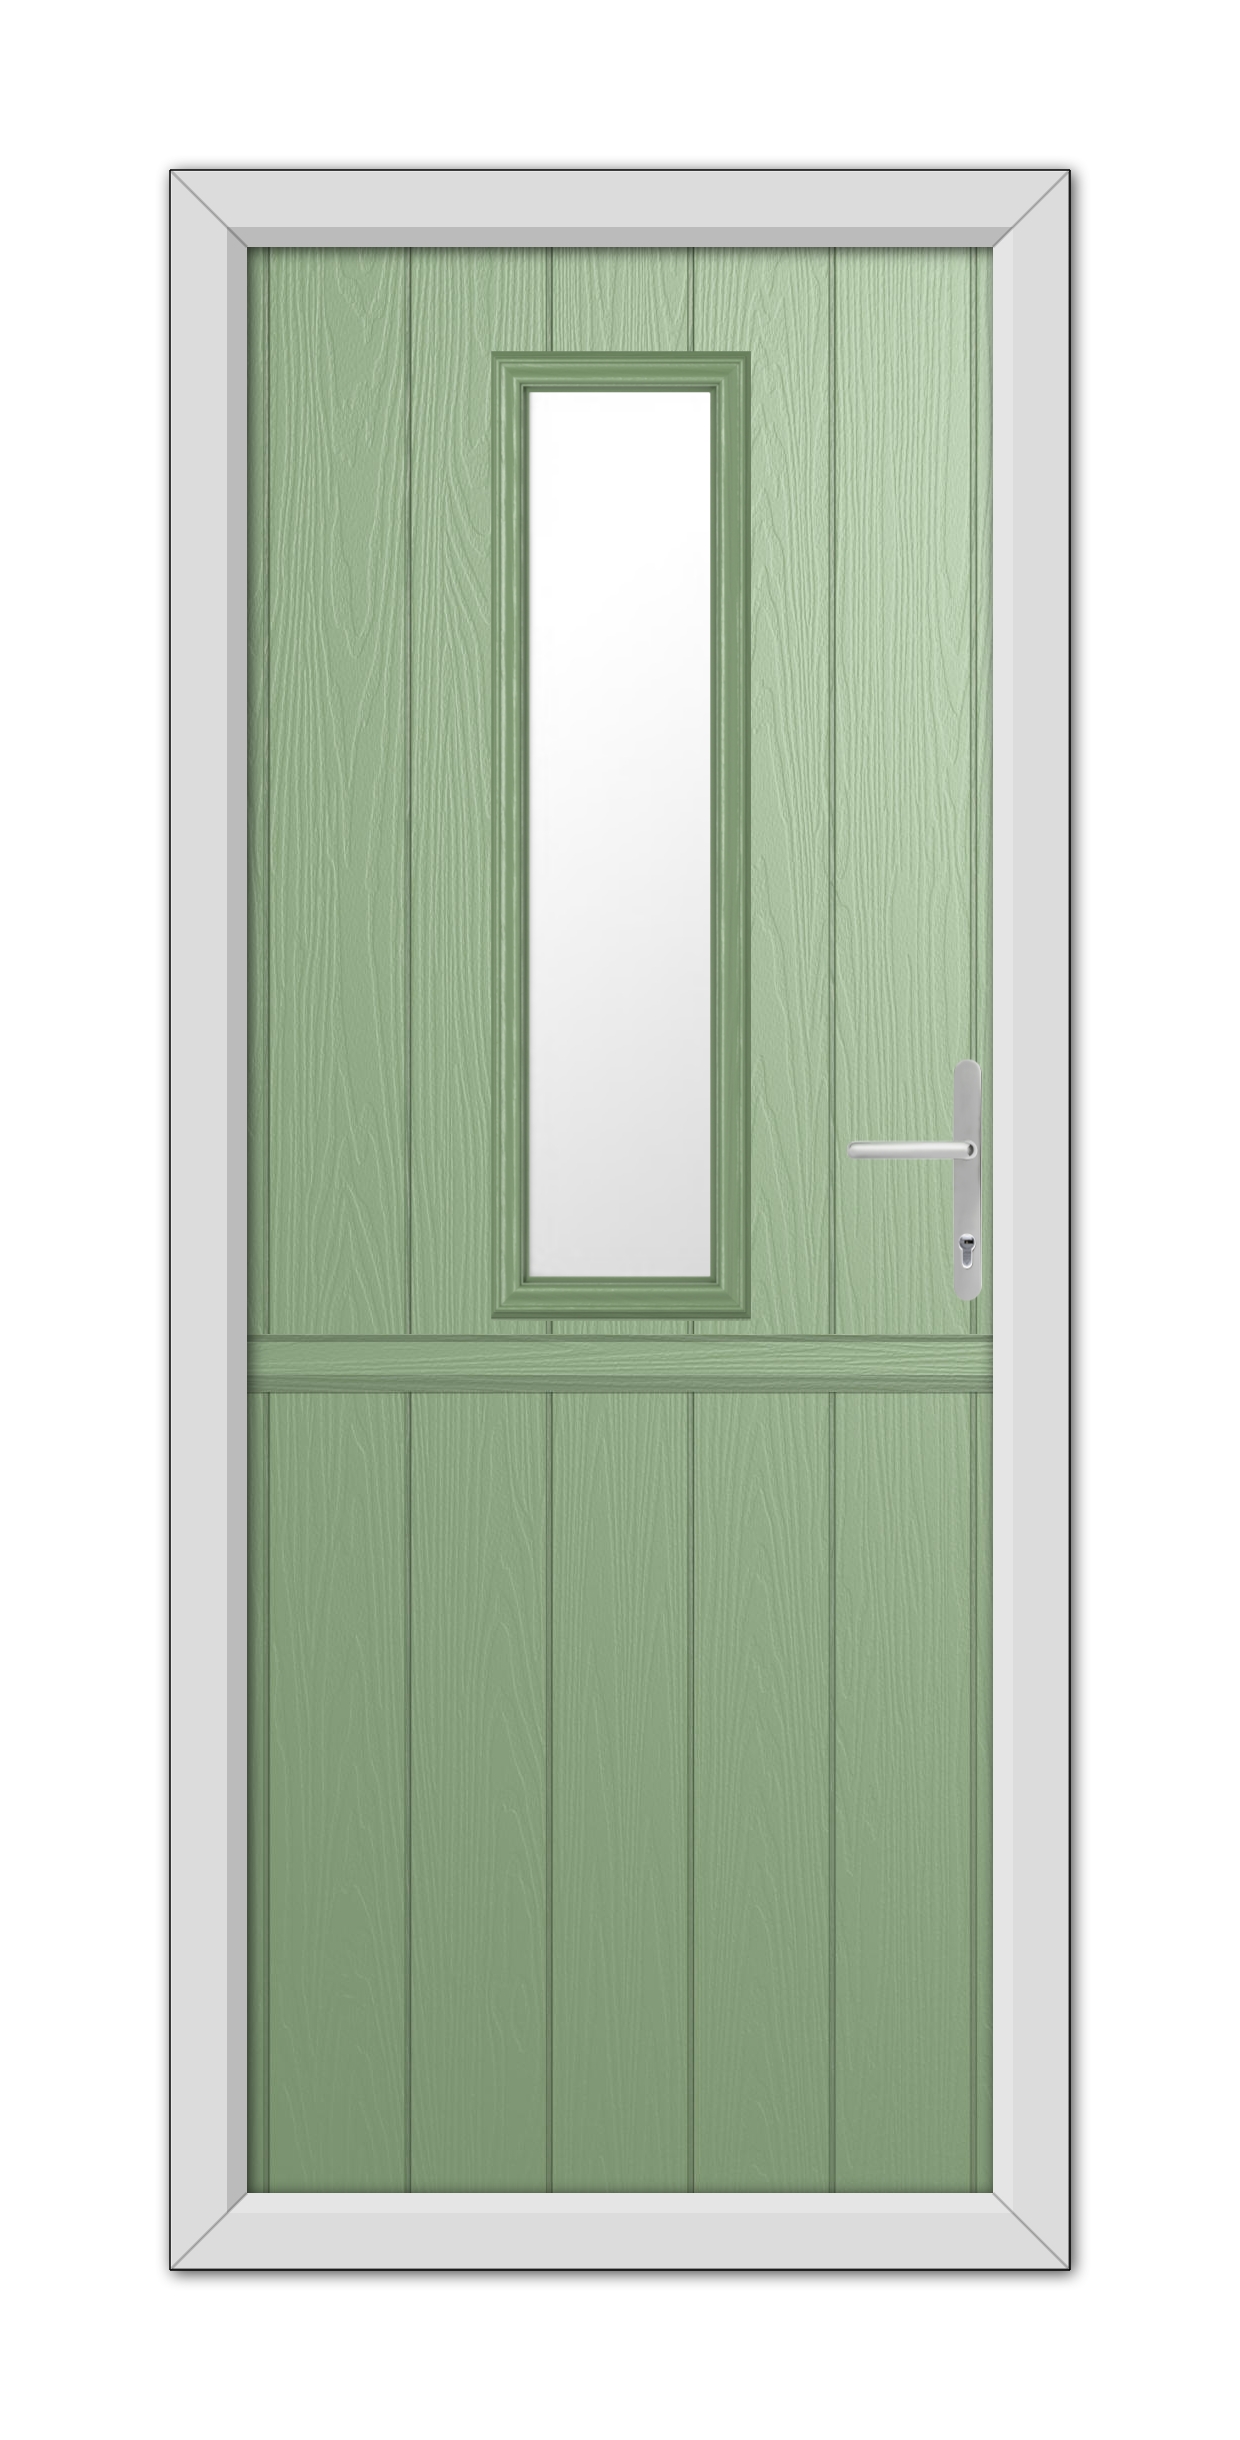 A Chartwell Green Mowbray Stable Composite Door with a vertical rectangular window and a modern handle, framed by a white border.